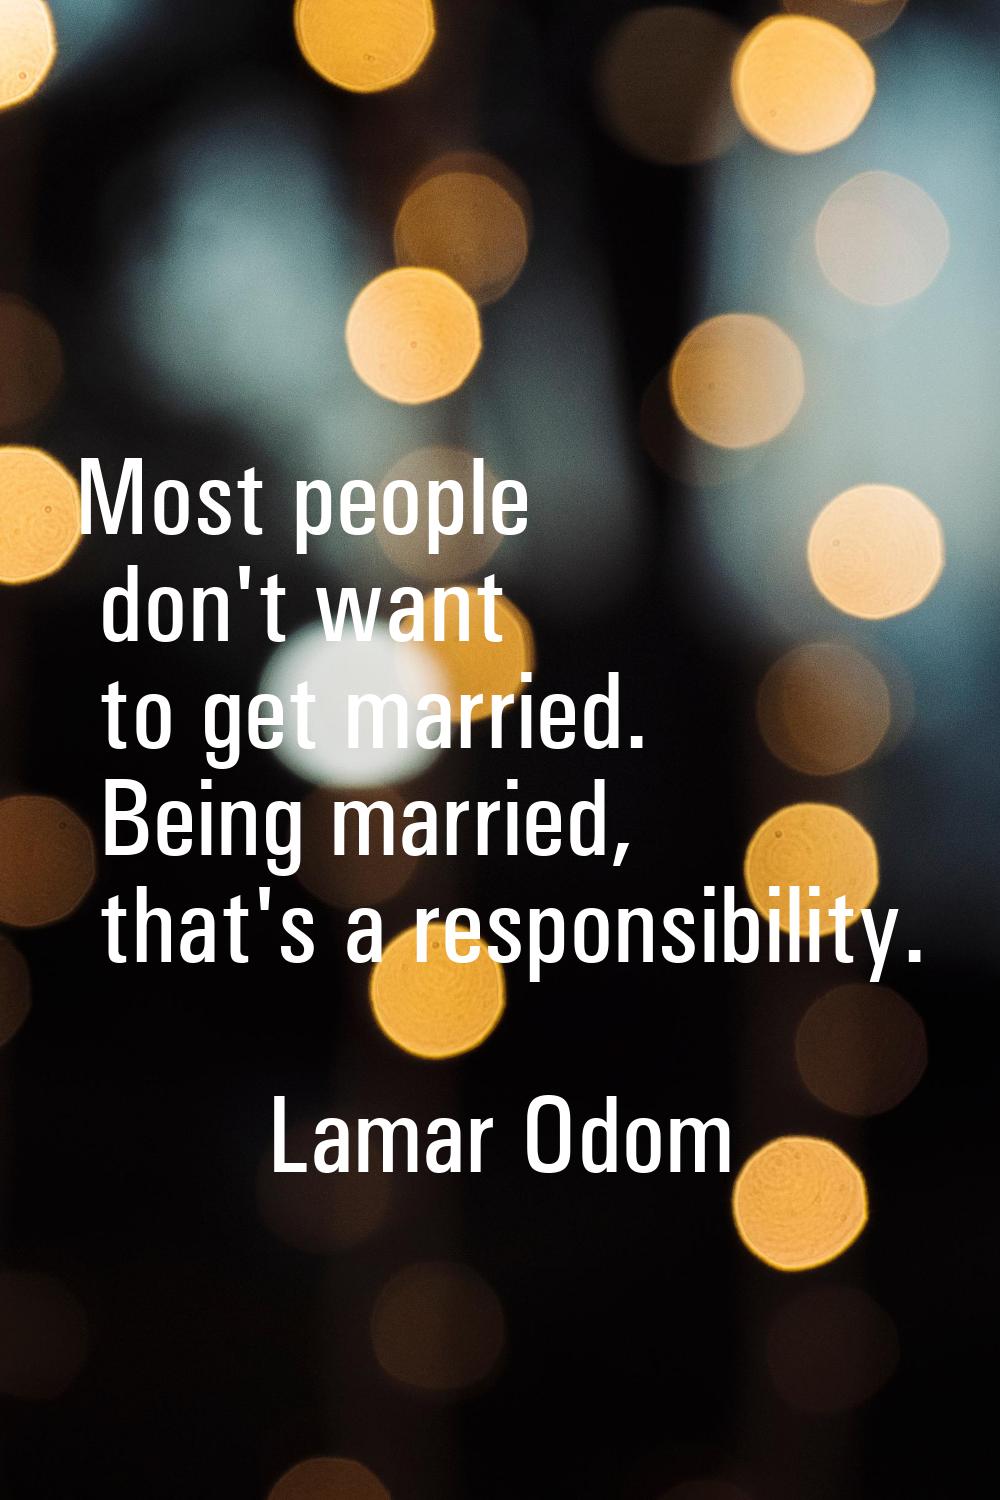 Most people don't want to get married. Being married, that's a responsibility.